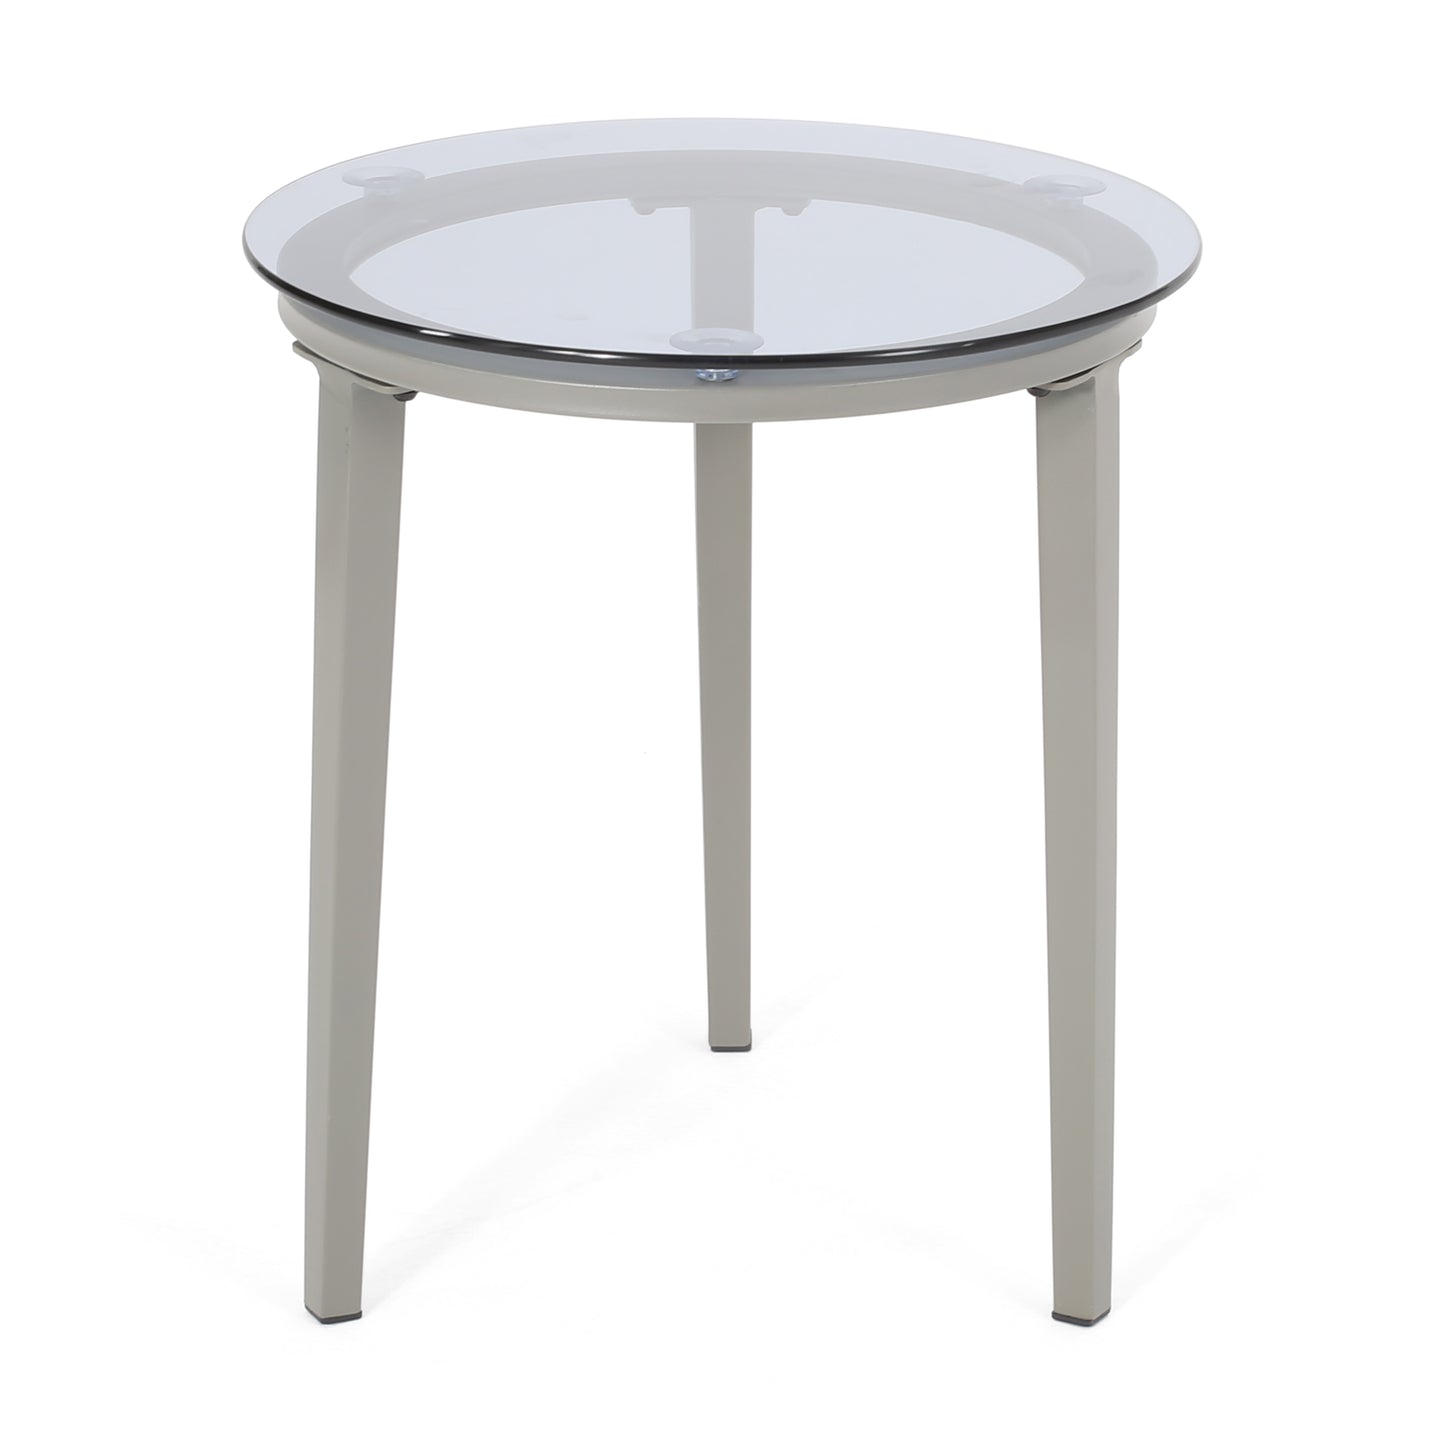 Kalyiah Outdoor Modern Side Table with Tempered Glass Top